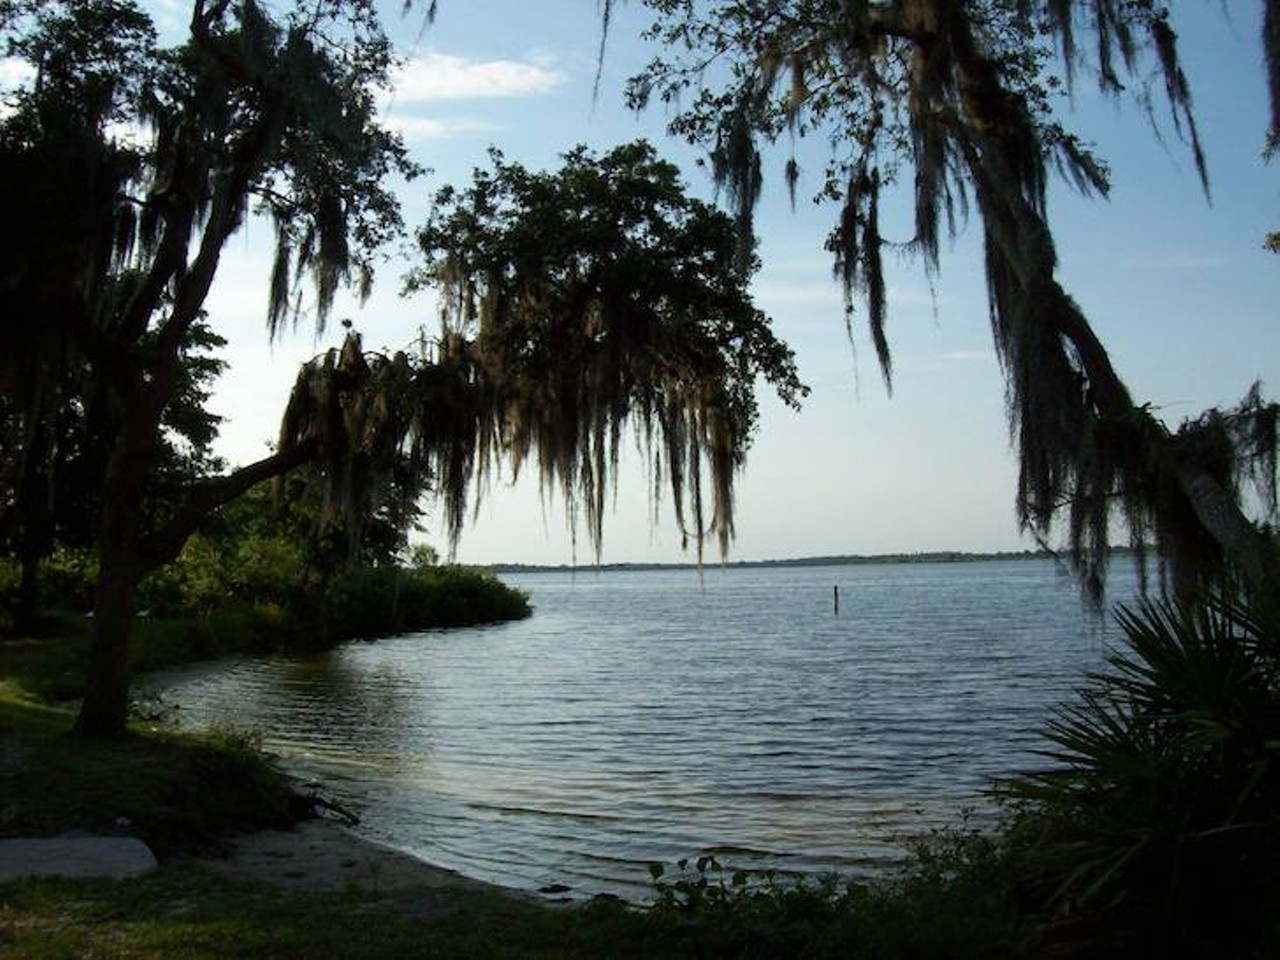 Lake Manatee State Park
Estimated drive from Tampa: 1 hour
Fifteen miles east of Bradenton, freshwater fishing and a swimming beach attract daily visitors to this park where, contrary to the name, you can&#146;t actually see manatees.
Photo via Florida State Parks/Facebook